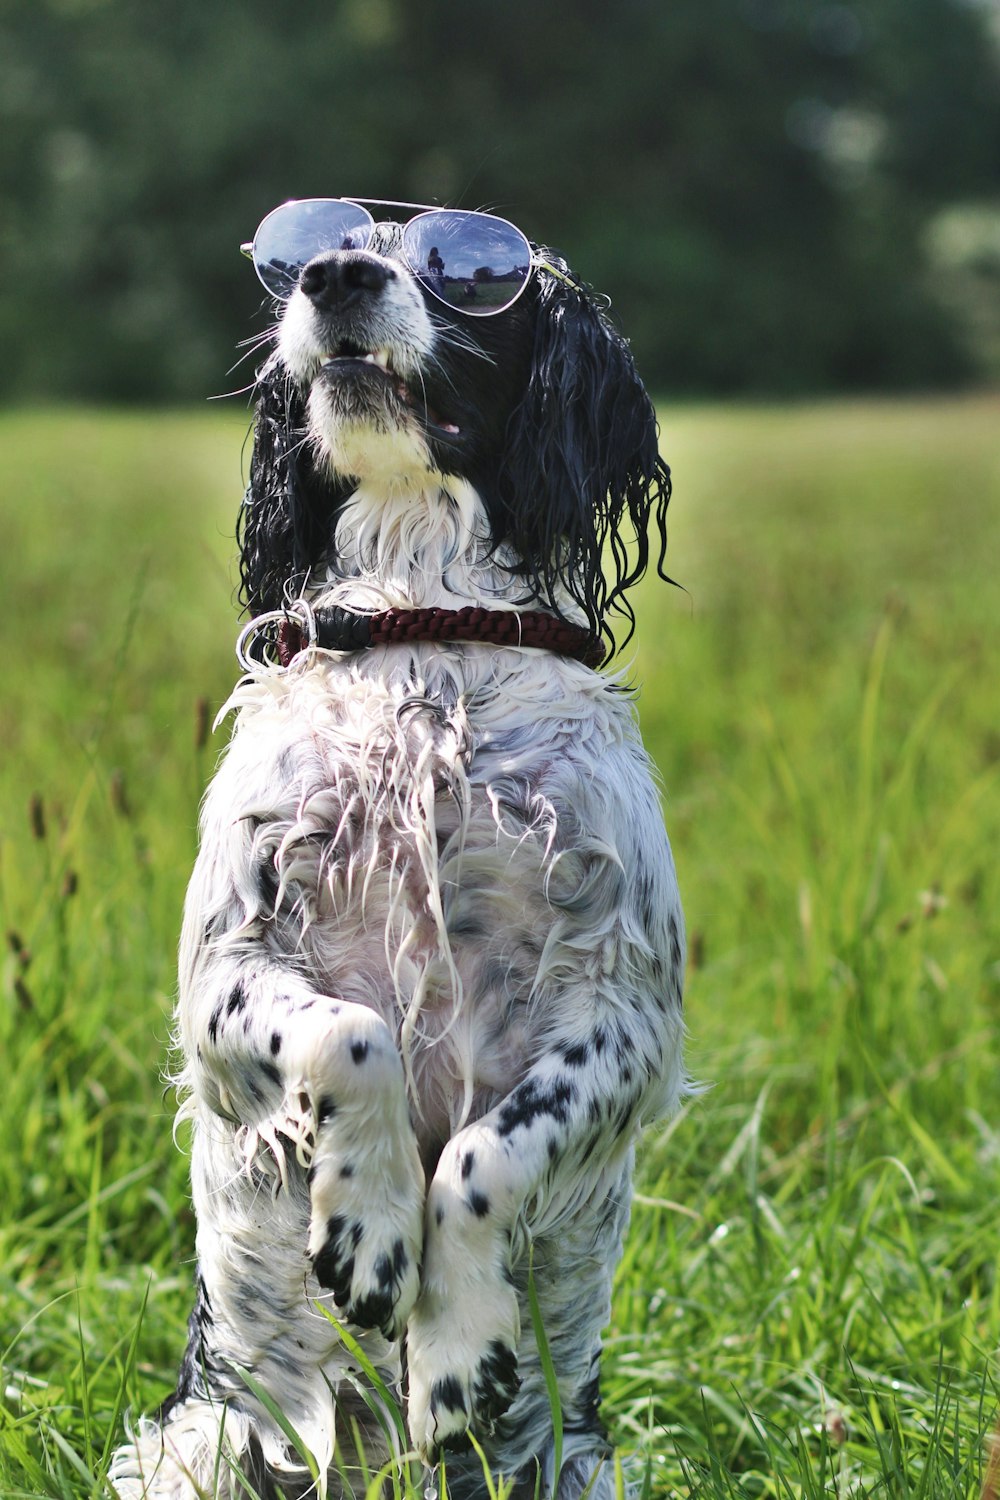 a black and white dog wearing sunglasses in a field